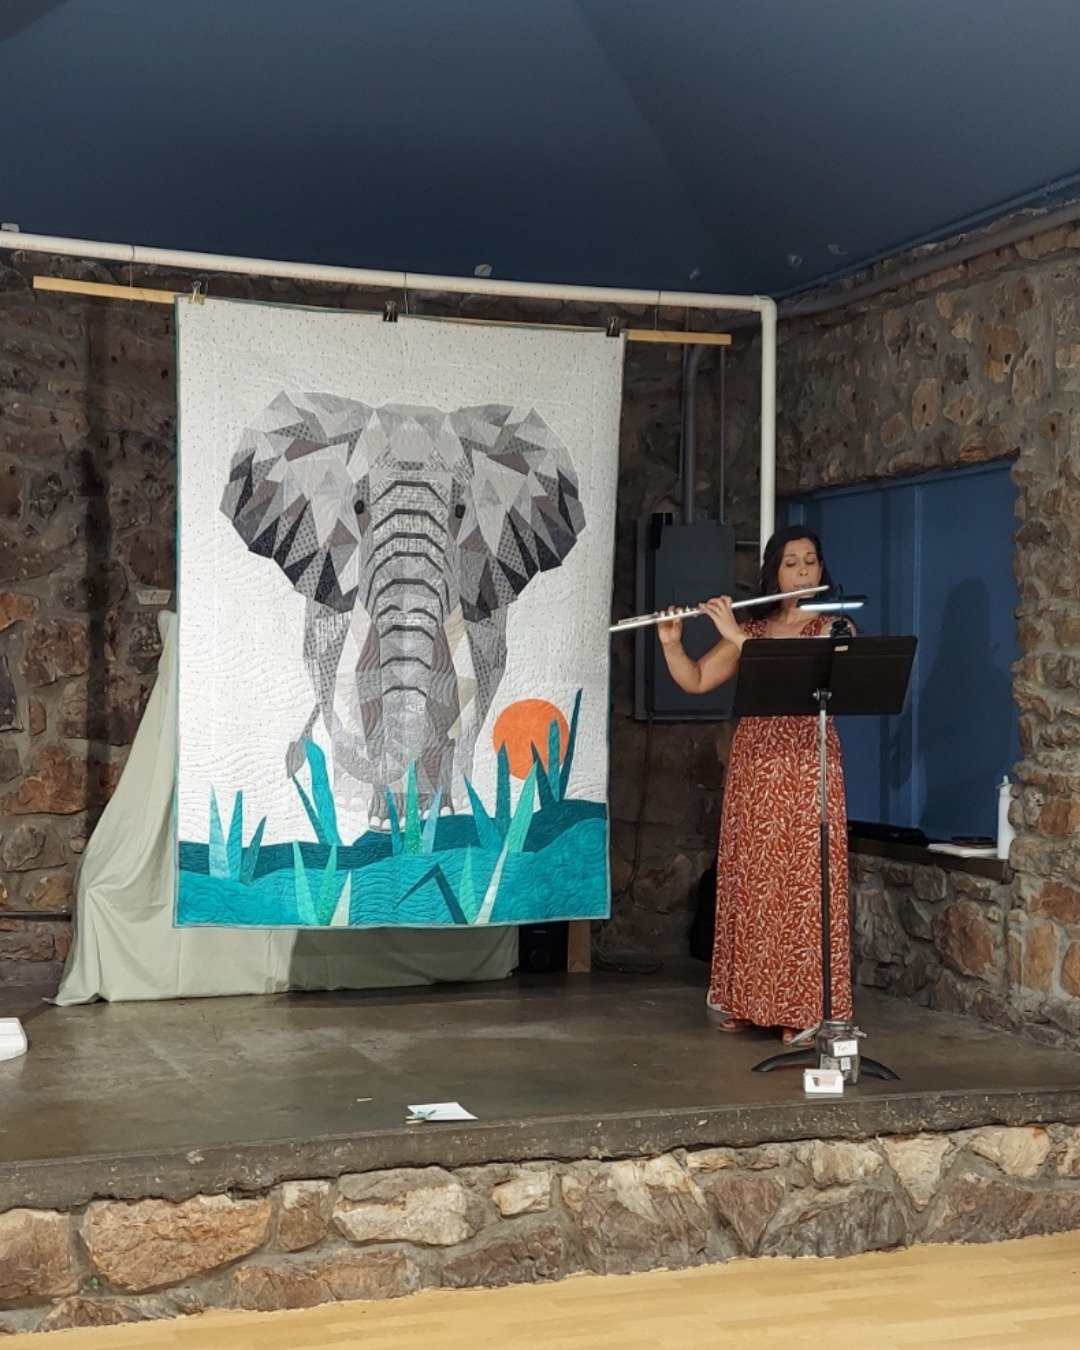 What a lovely evening last Friday at the @jcparks_rec &amp; Missouri River Quilt Guild Expo and Auction! 

I had the privilege of playing solo flute music surrounded by these amazing works of art. The time, creativity, and sheer determination that we